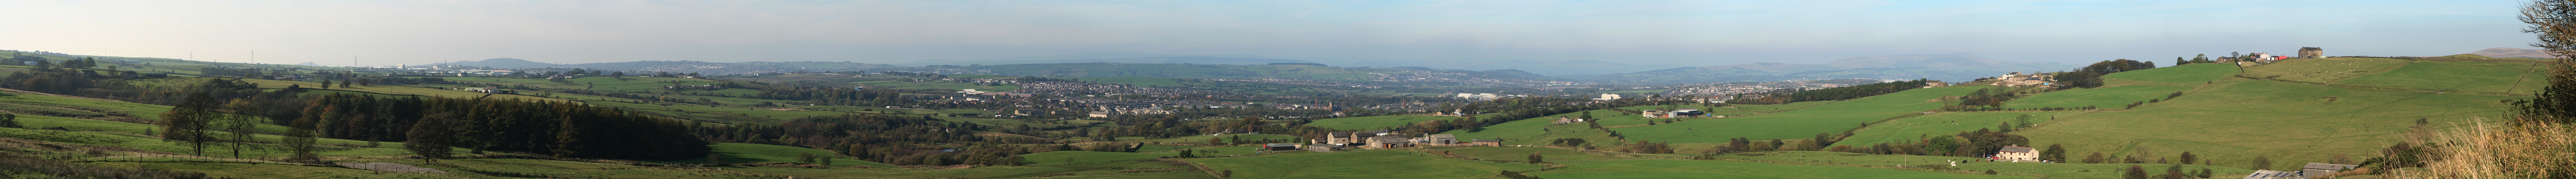 Panorama of the Borough of Hyndburn from a viewpoint on B6232 road